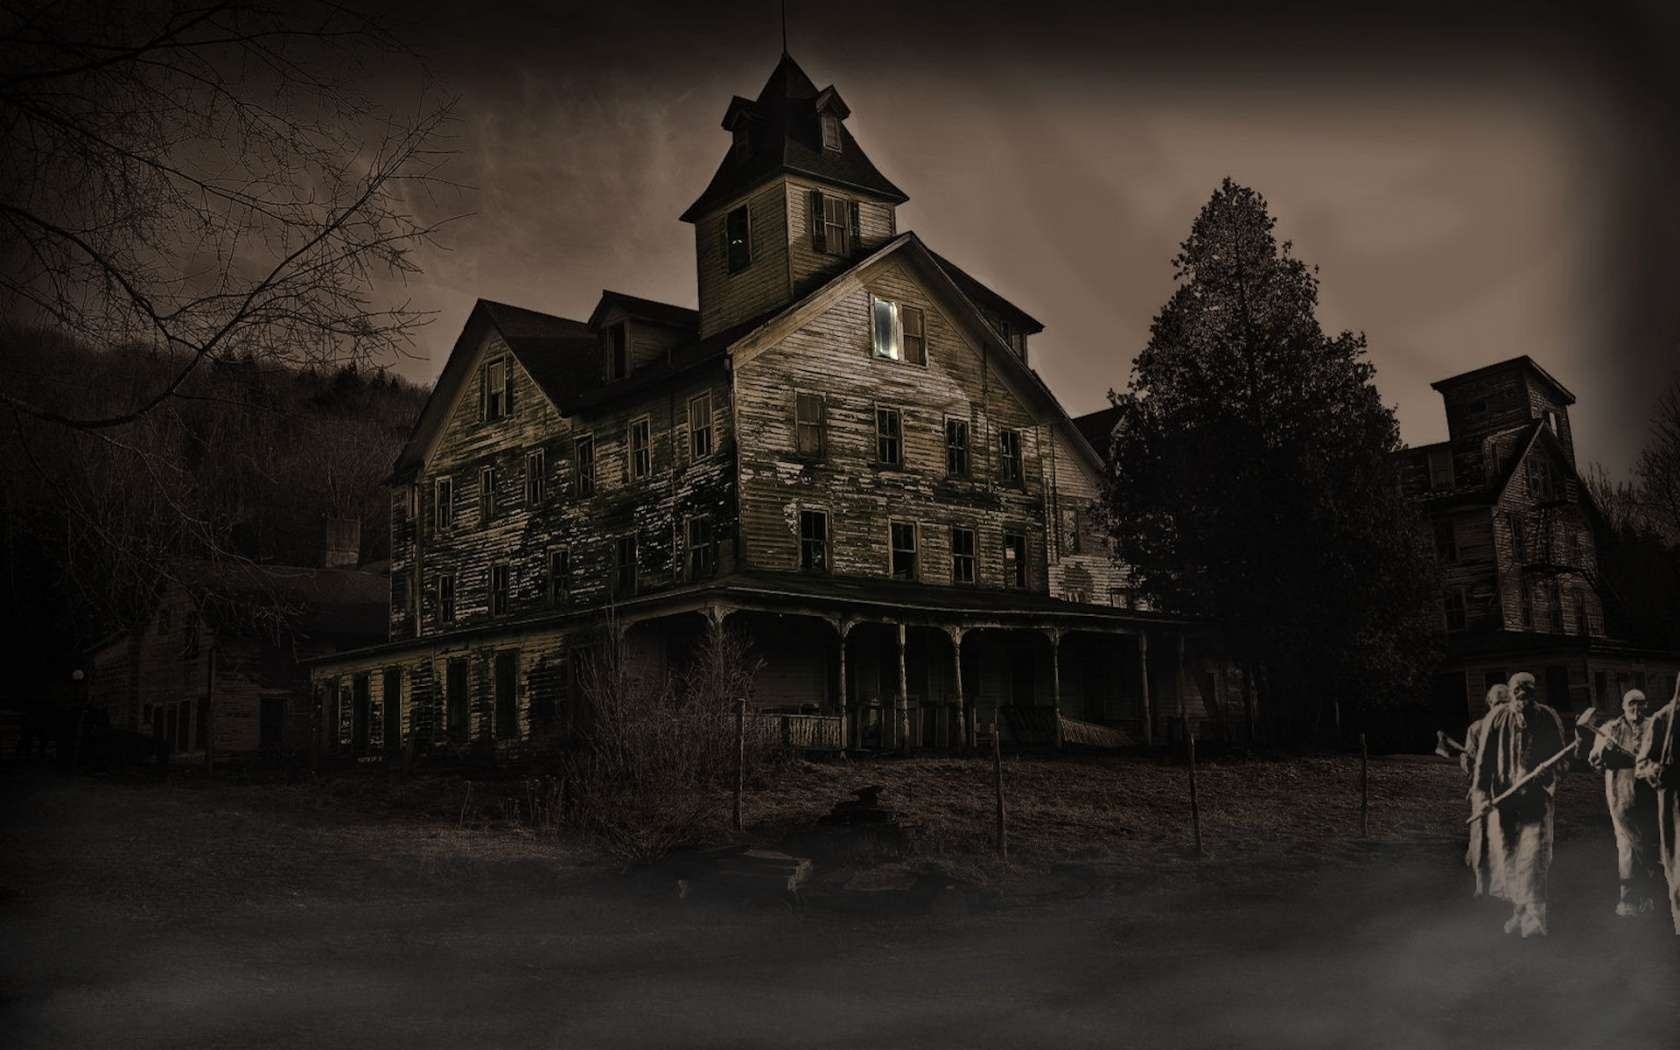 Haunted House Wallpaper 1680 x HD Wallpapers Backgrounds haunte 1680x1050